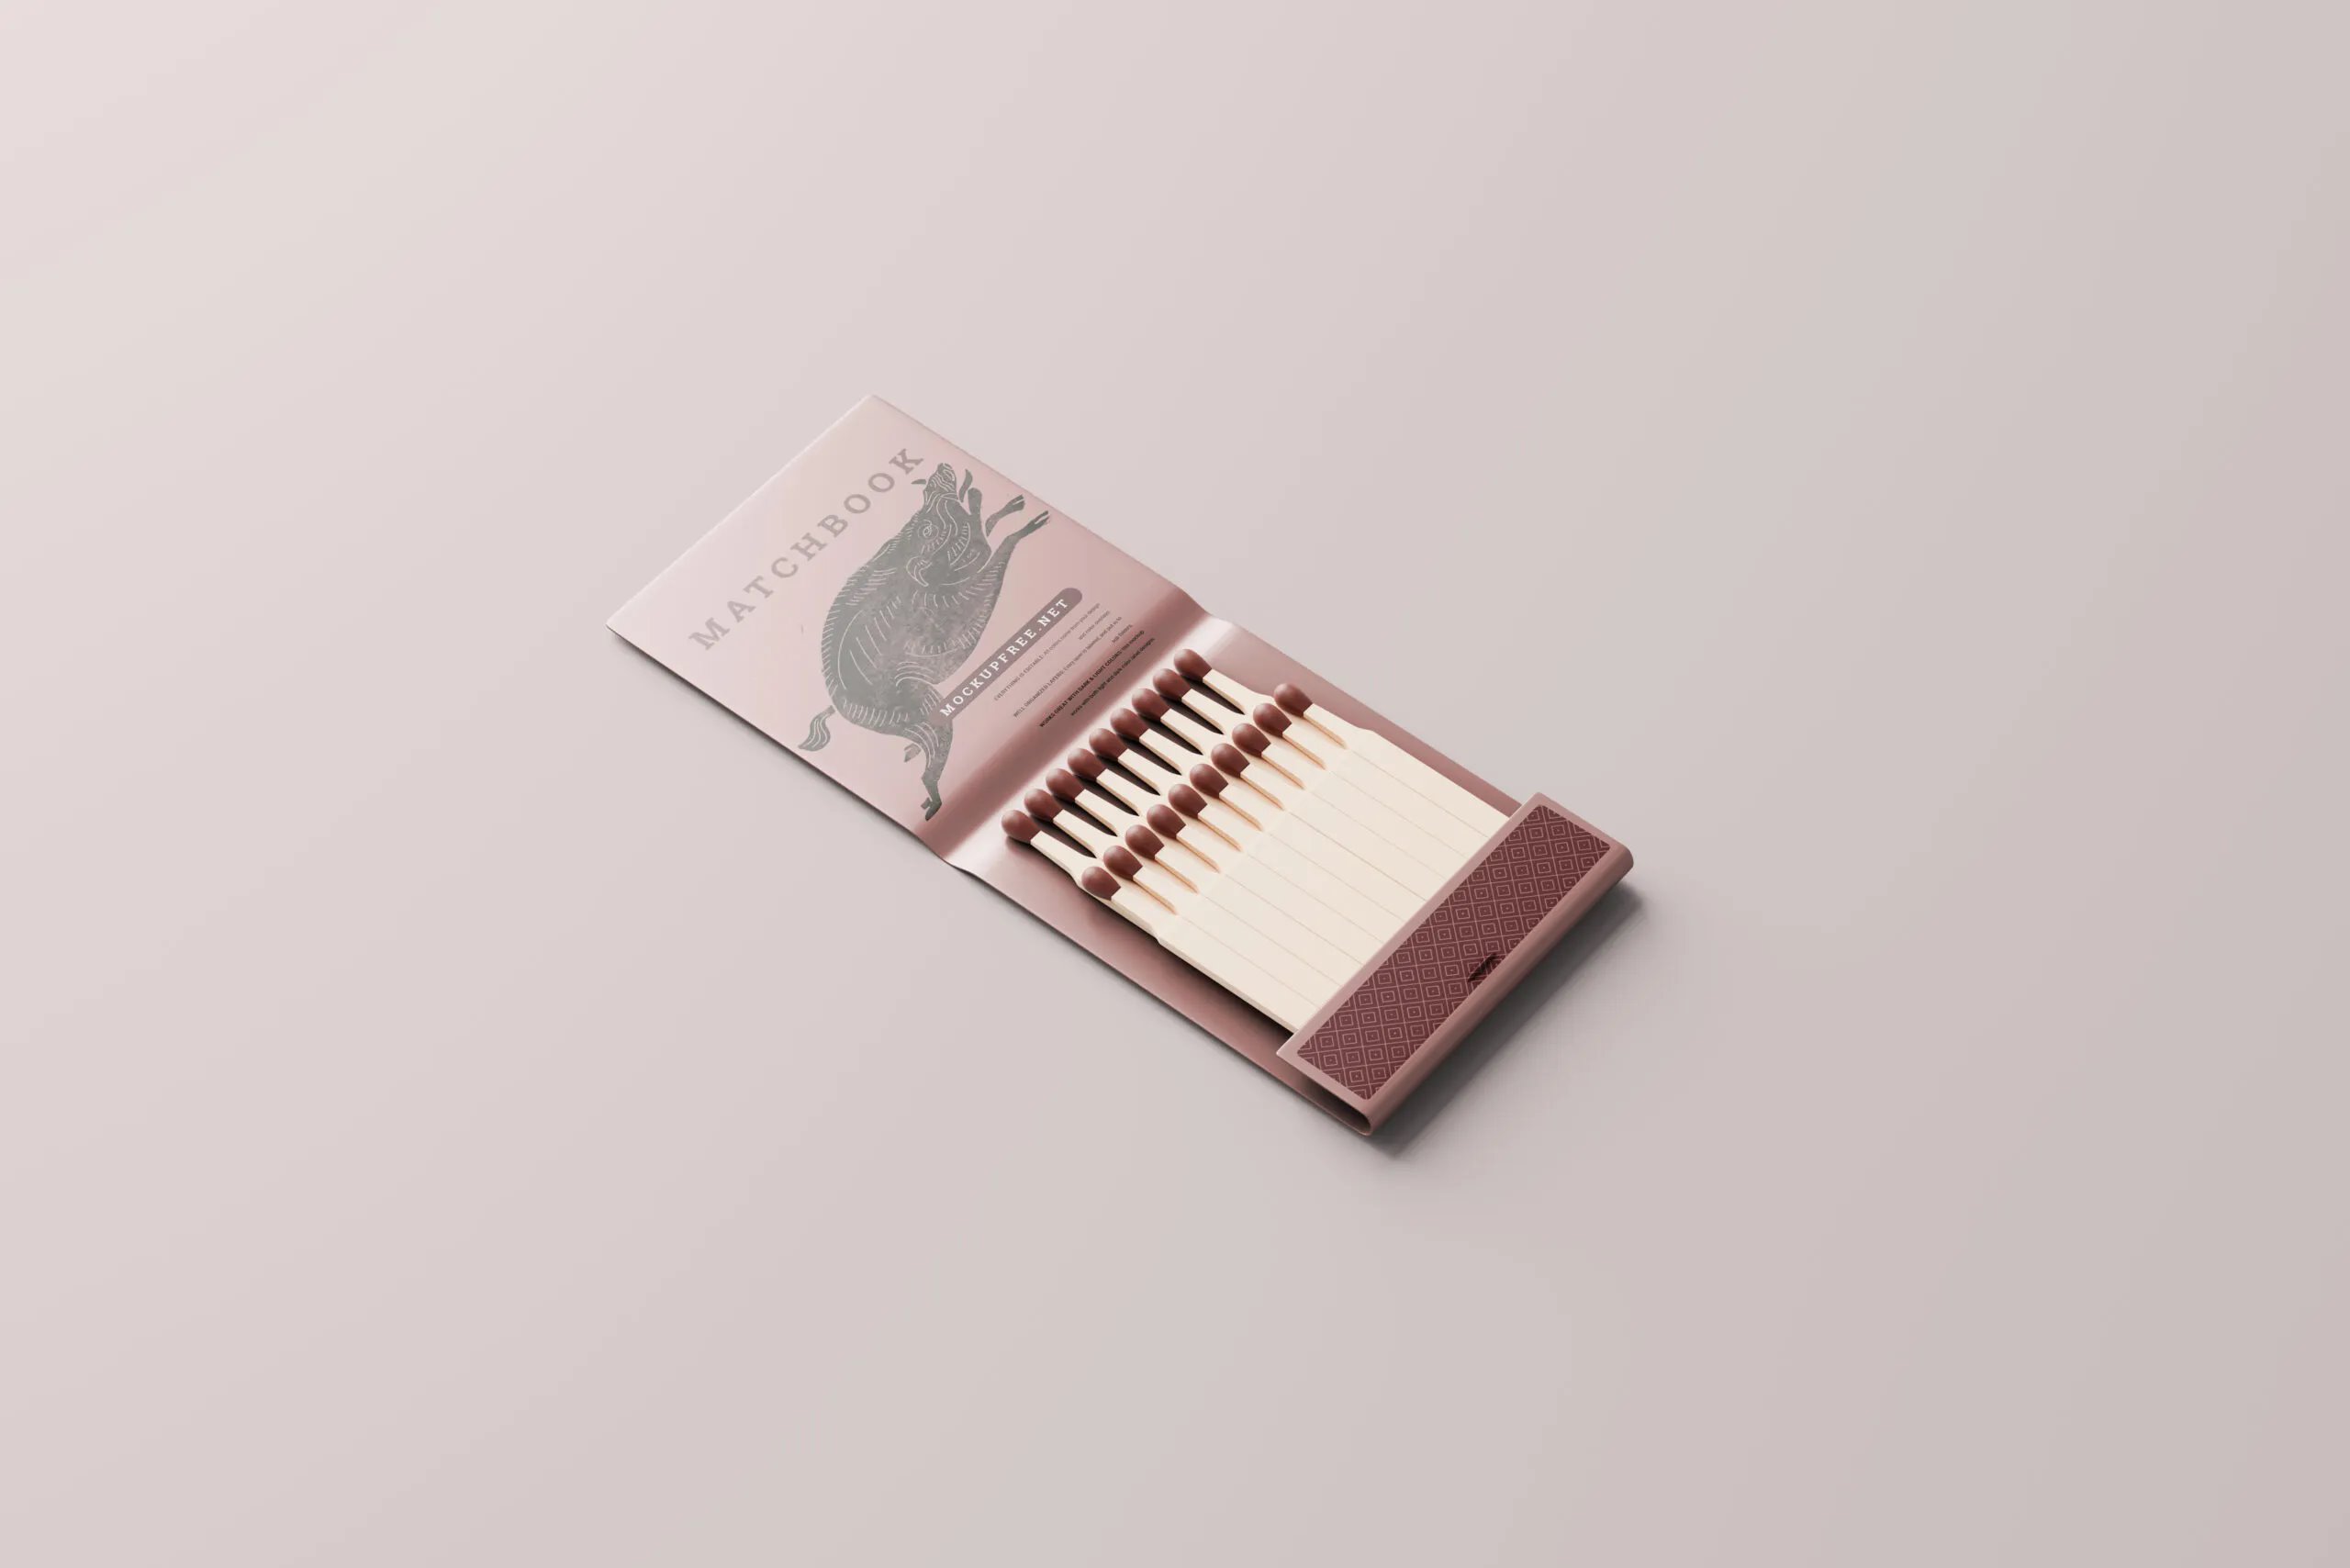 5 Matchbook Mockups in Top and Perspective Visions FREE PSD